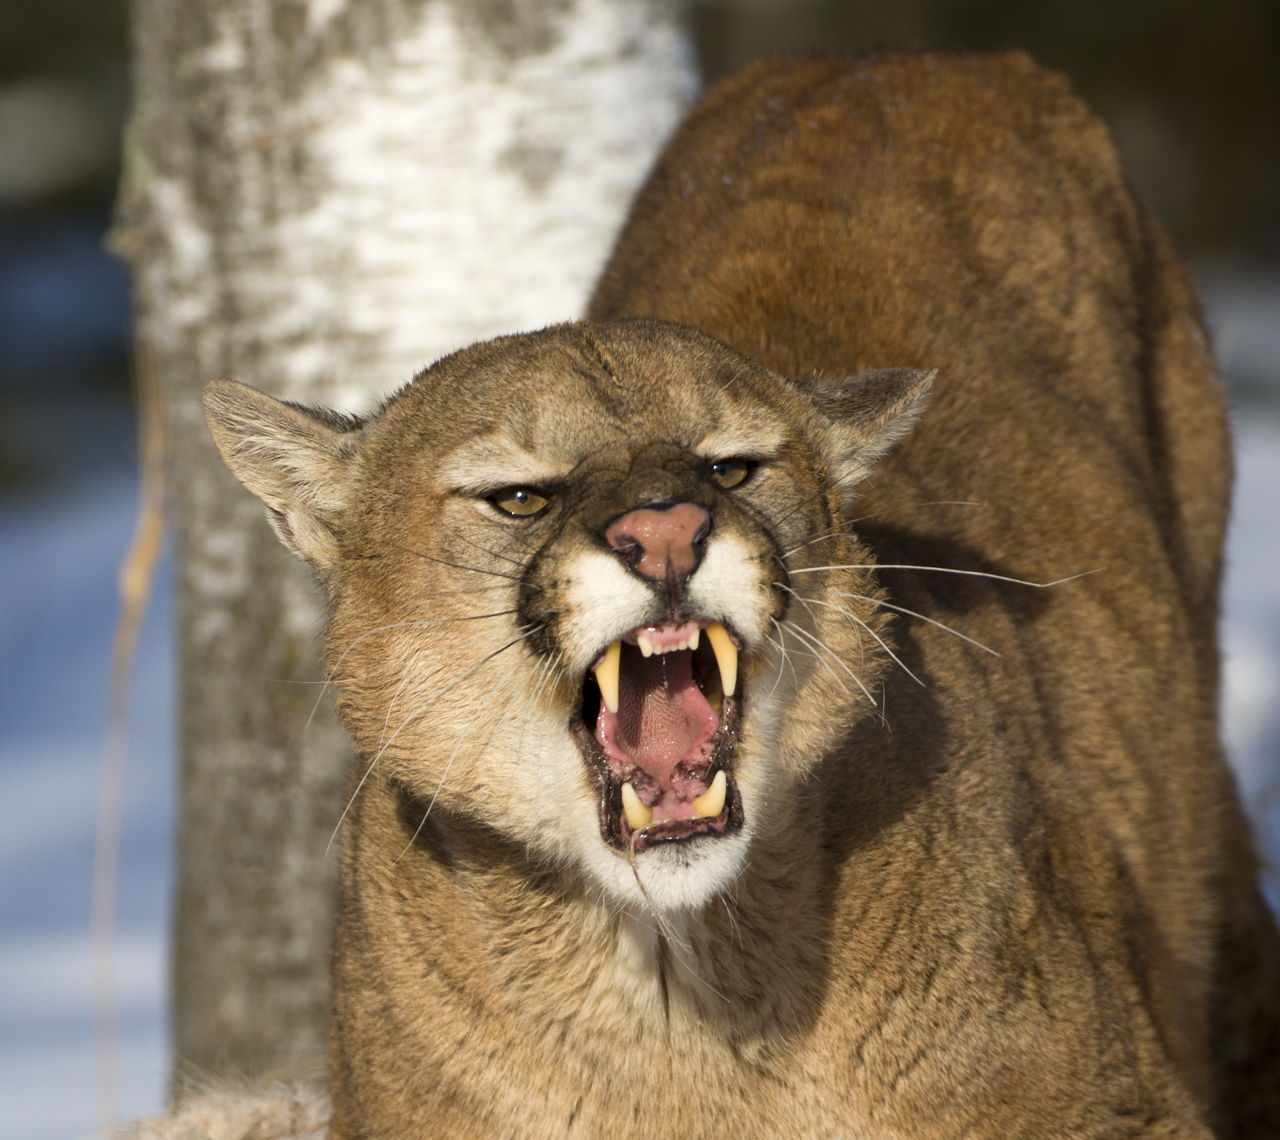 Interesting Facts about Cougars (Mountain Lions)